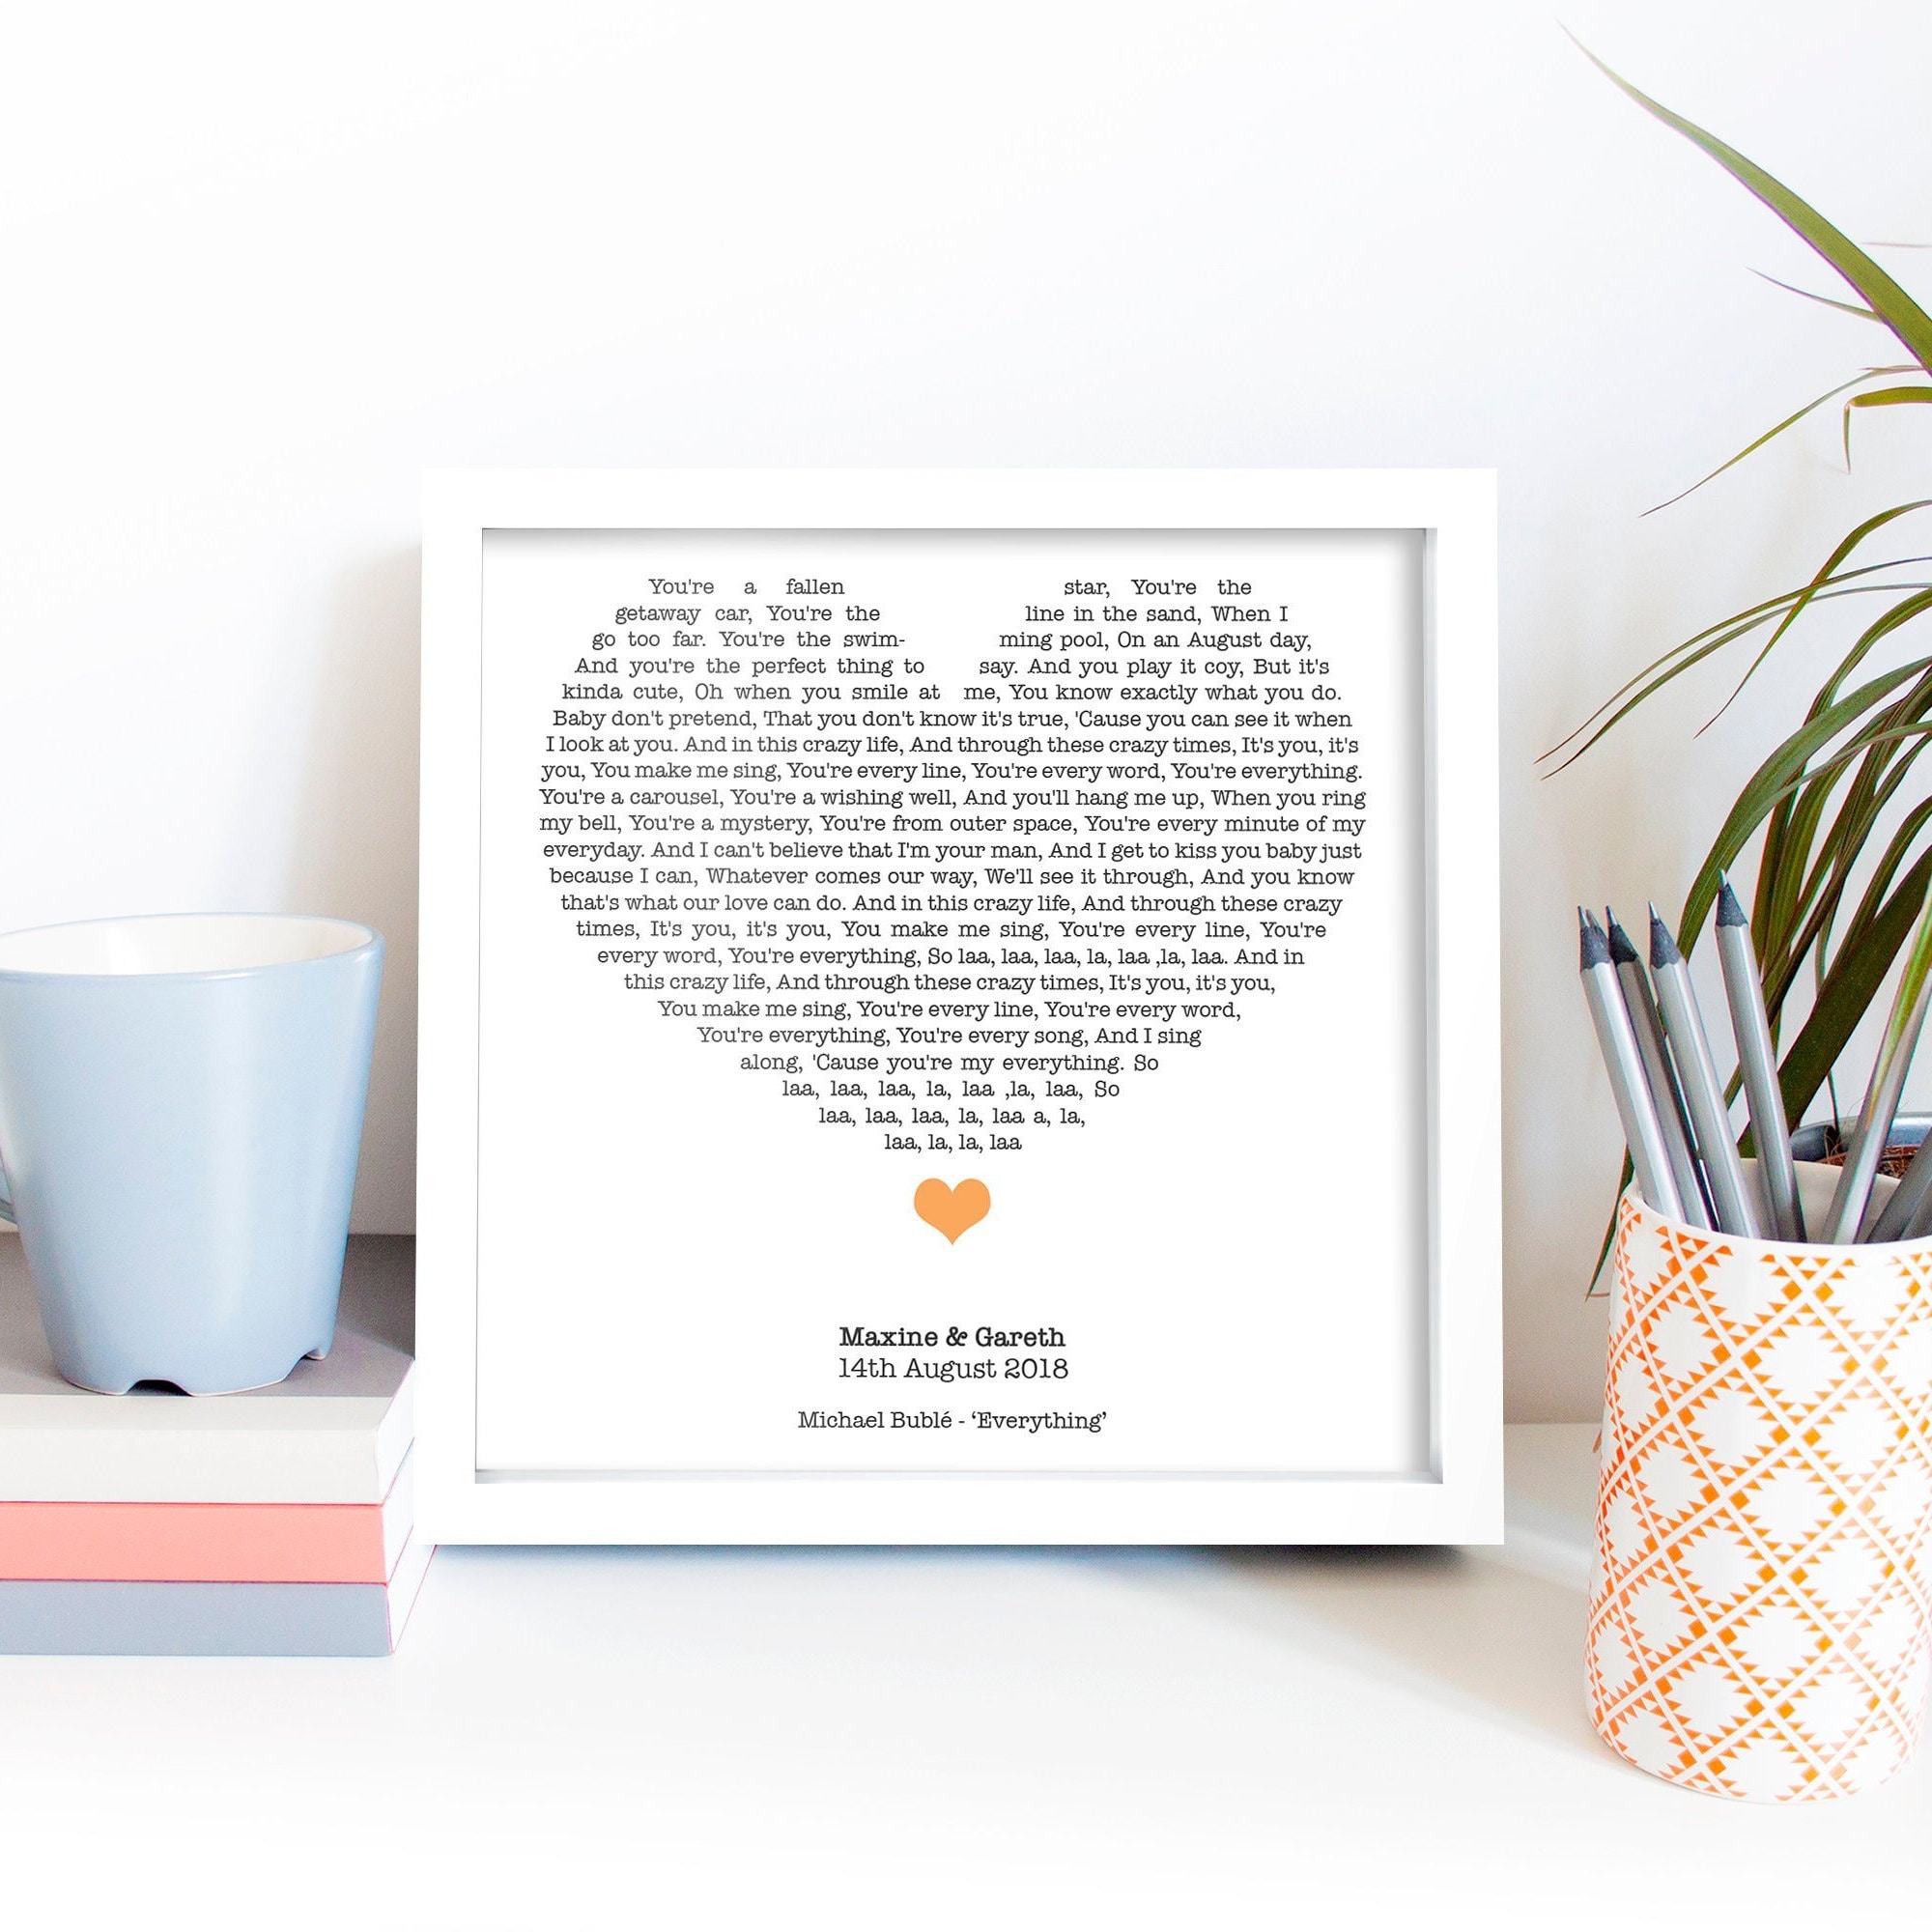 PERSONALISED ANNIVERSARY GIFT Any Song Lyrics Poem Words As HEART PRINT 